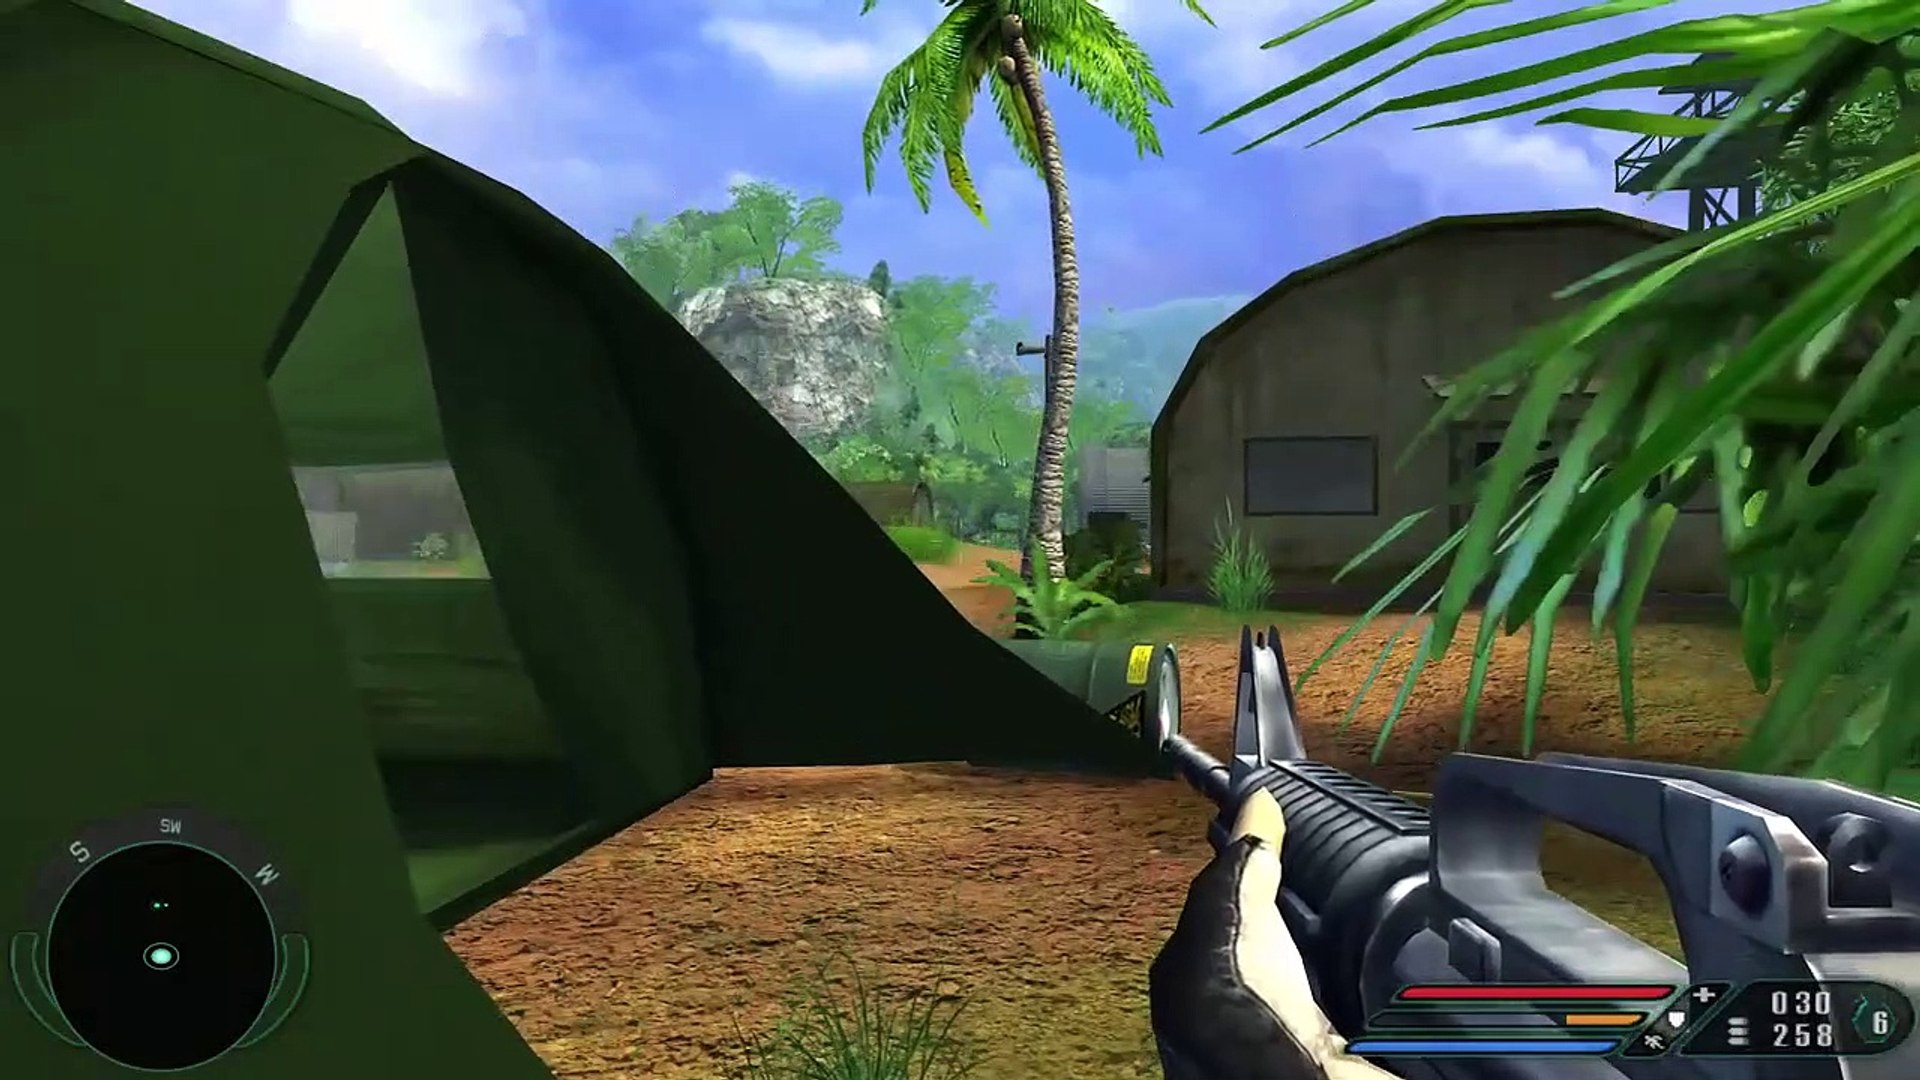 Far Cry  (PC) [2004] Gameplay 